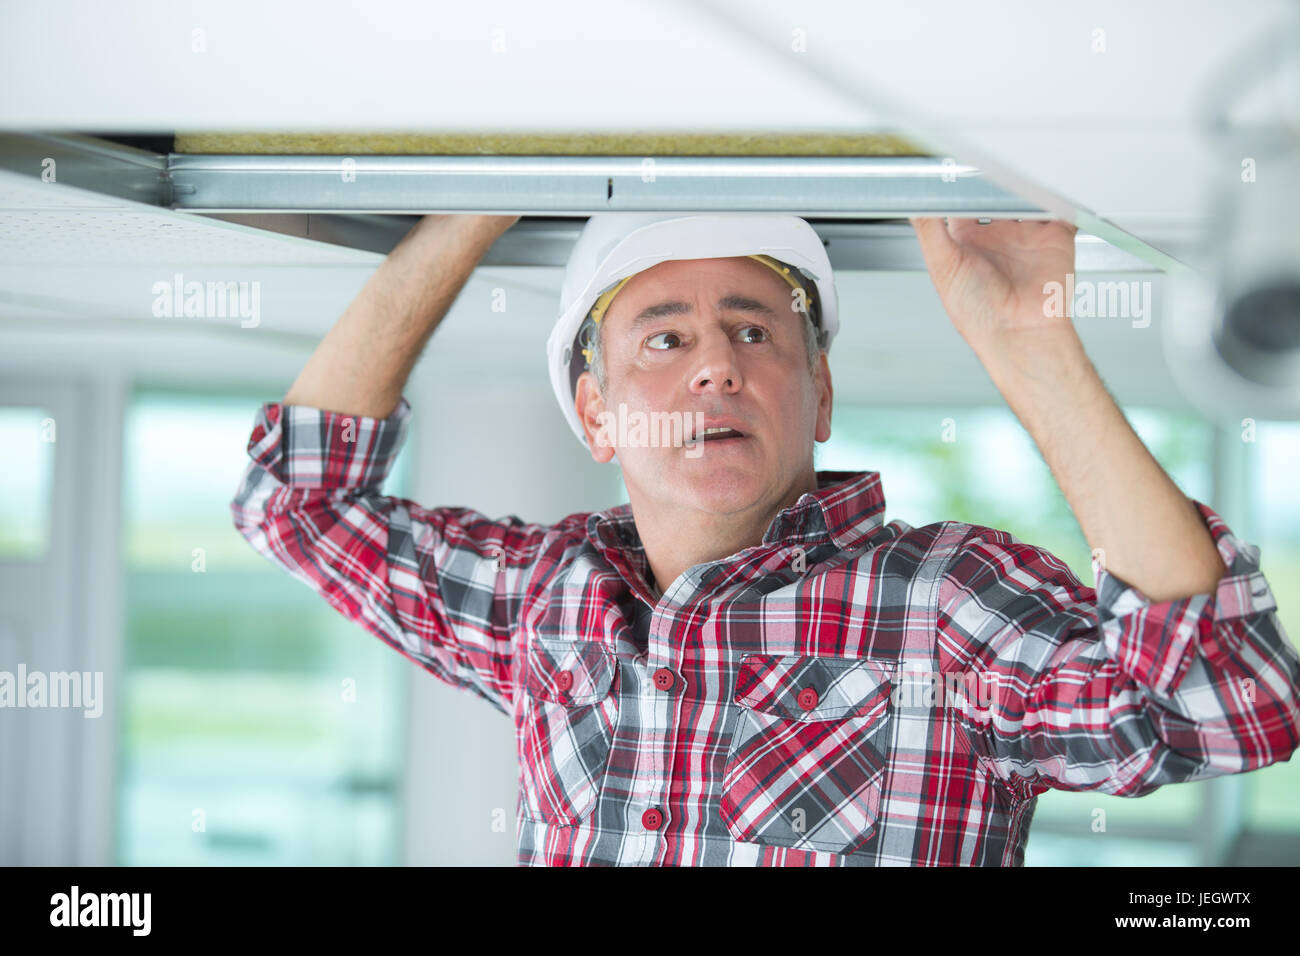 man doing an installation of air conditioner and heating duct Stock Photo